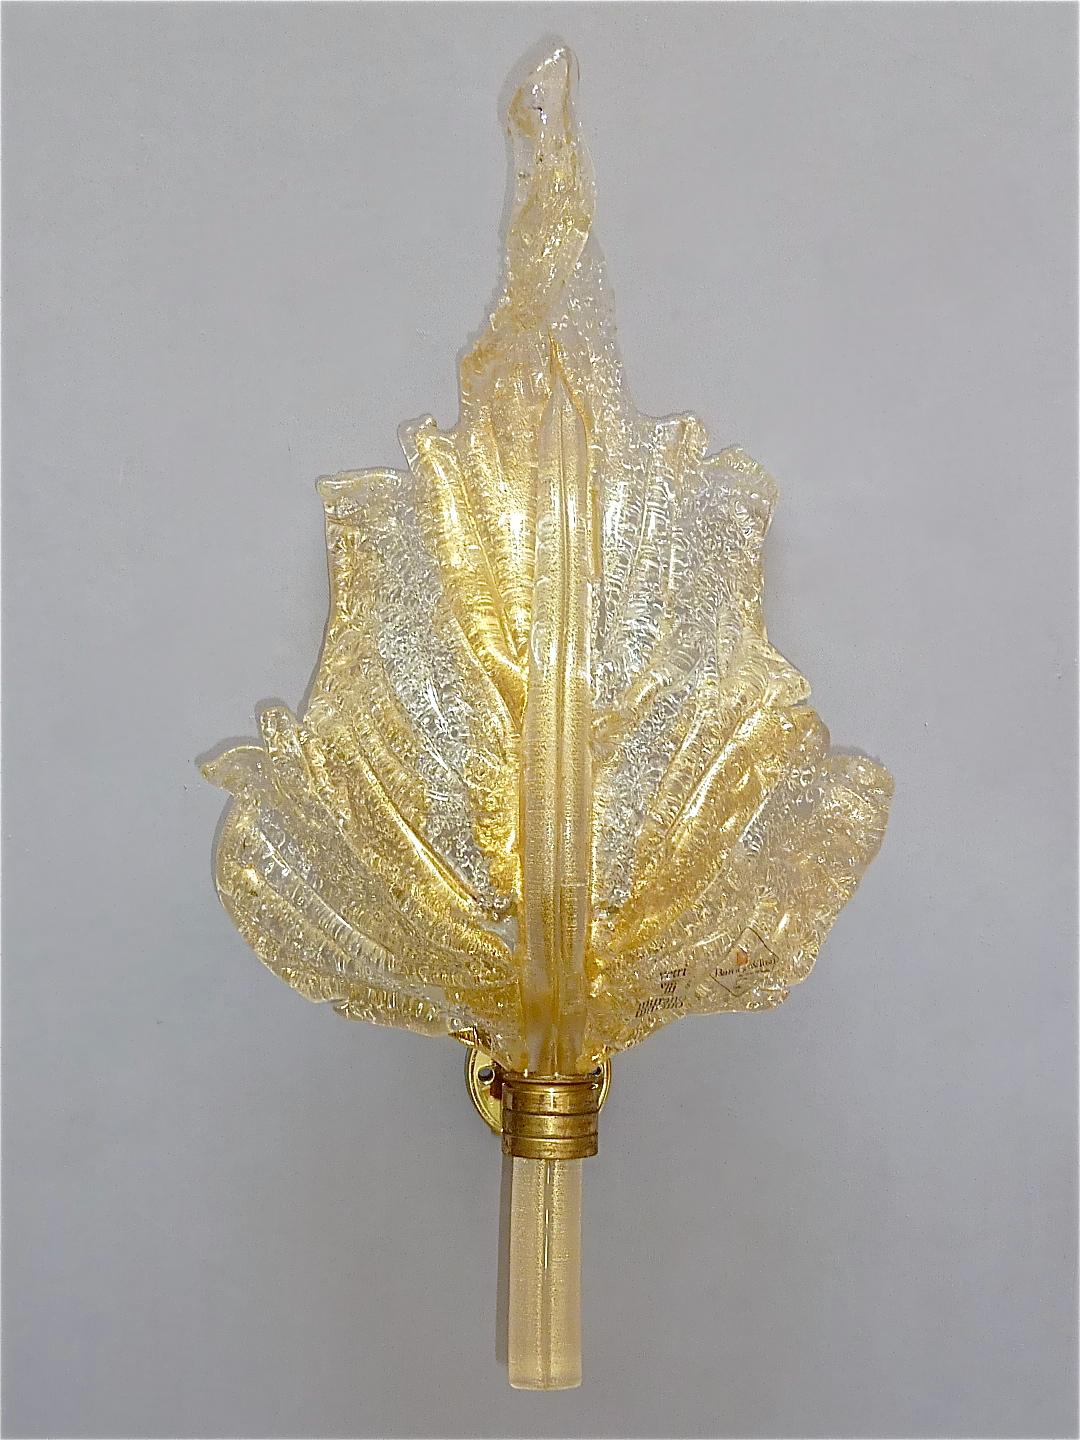 Mid-Century Modern Large Signed Pair Barovier & Toso Leaf Sconces Italian Murano Glass Floral 1970s For Sale